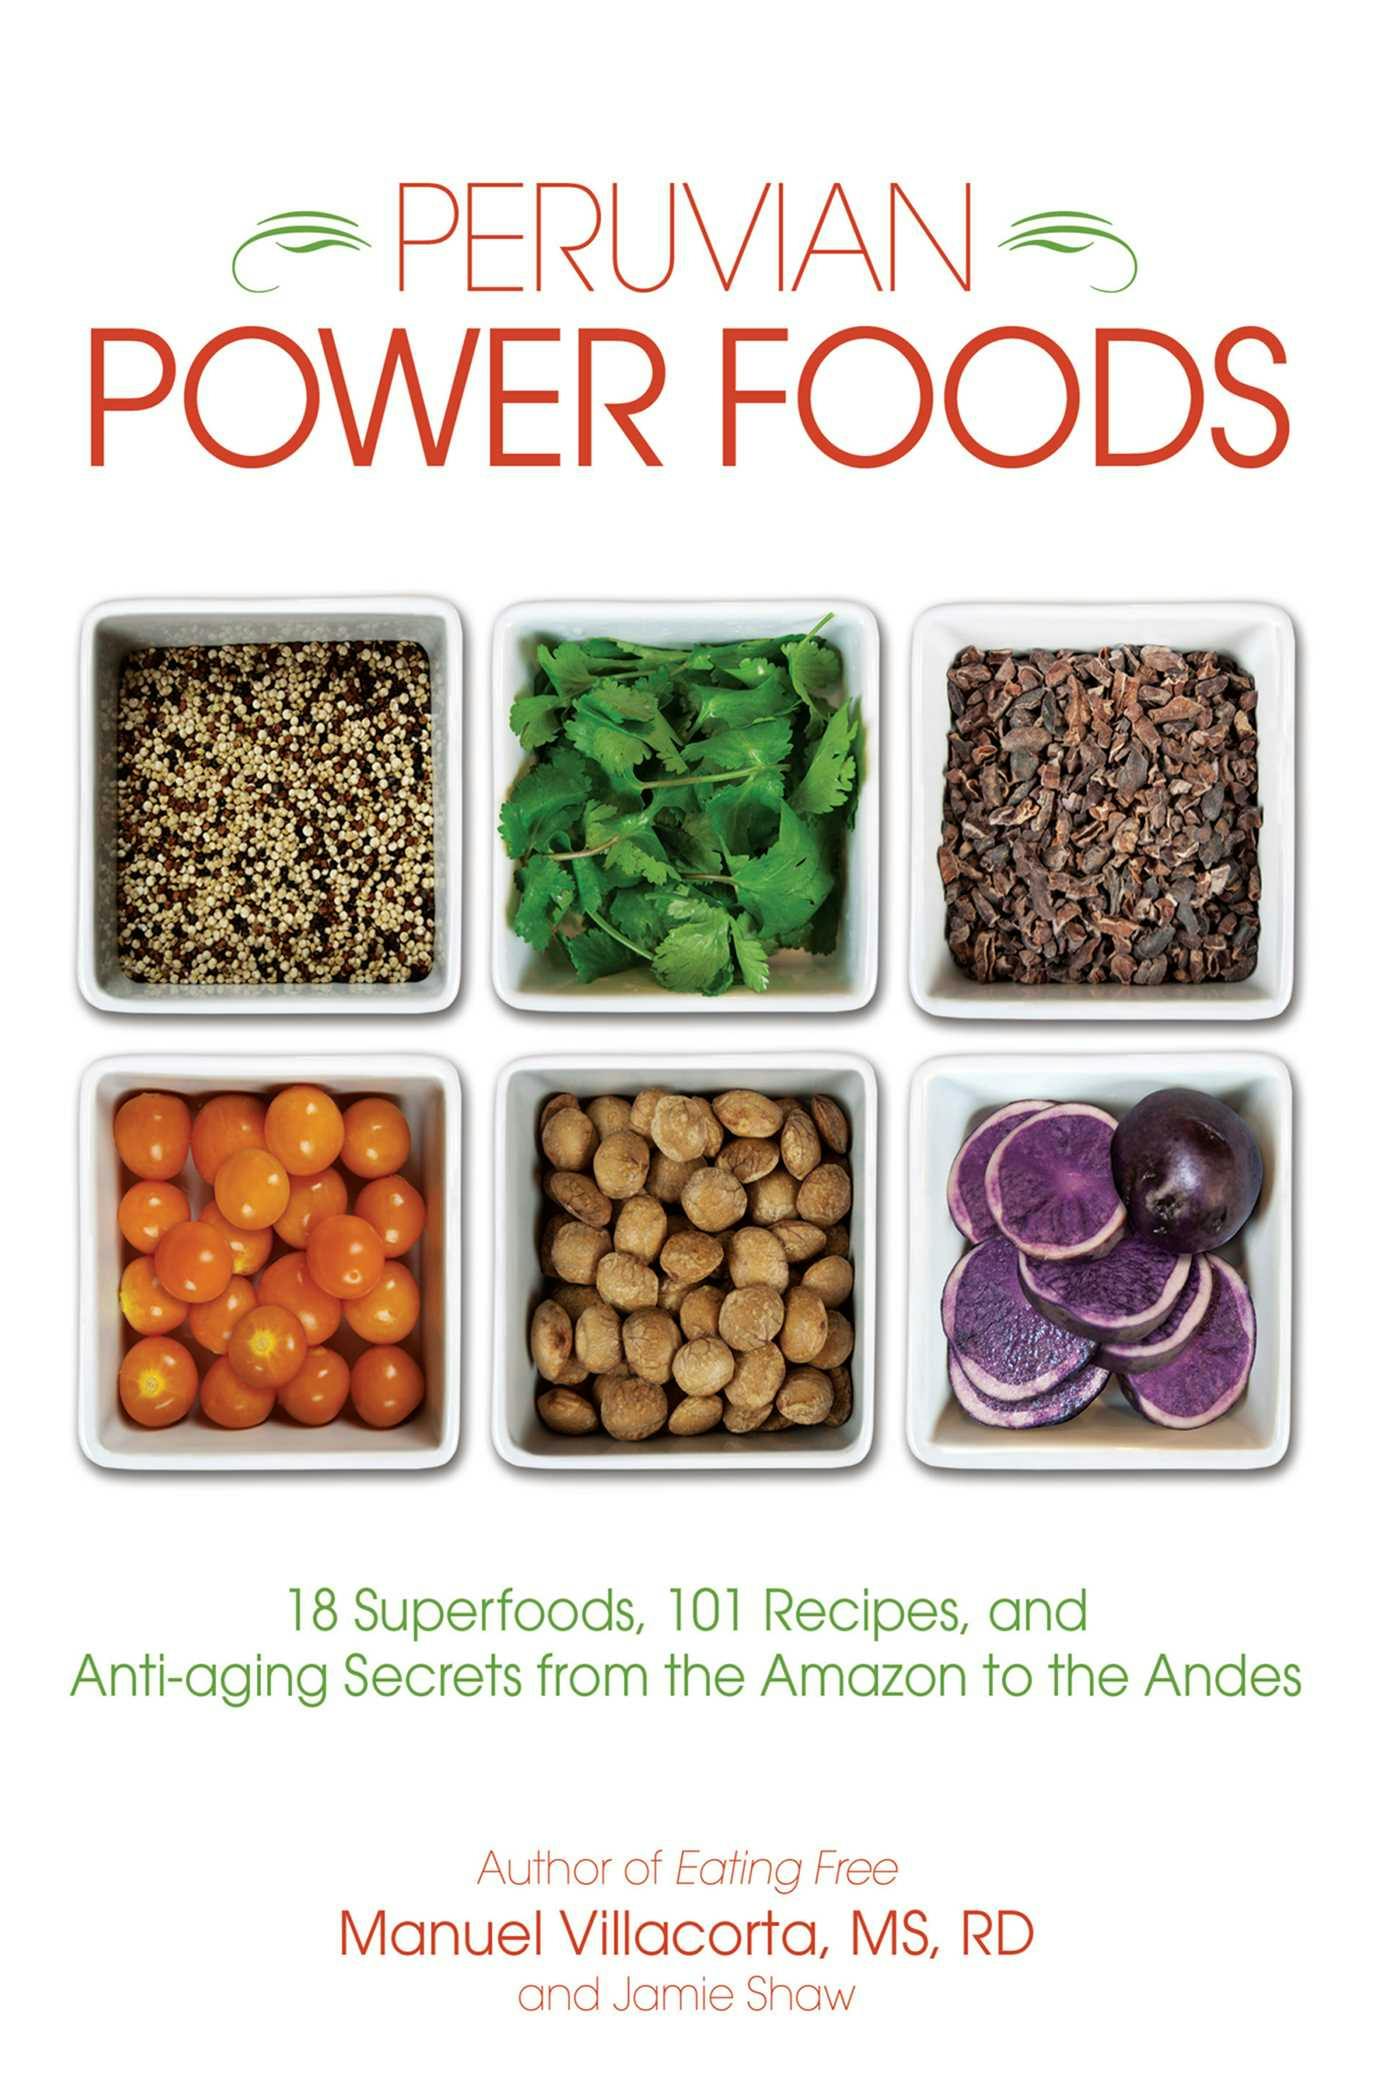 Peruvian Power Foods: 18 Superfoods, 101 Recipes, and Anti-aging Secrets from the Amazon to the Andes - Jamie Shaw, Manuel Villacorta